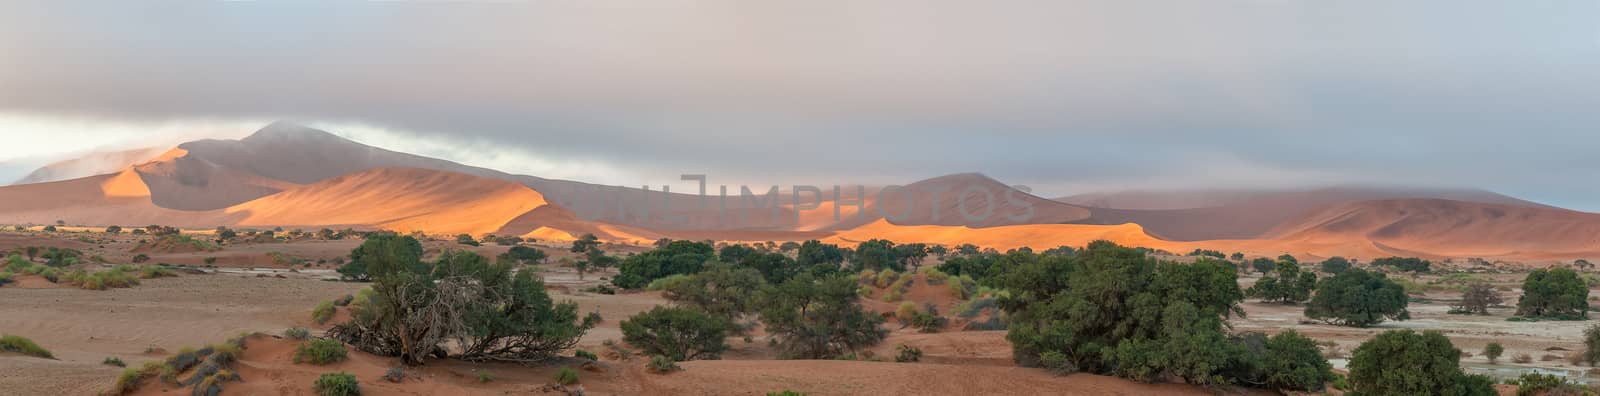 Panoramic view from Sossusvlei towards Deadvlei. Big Daddy dune and trees are visible